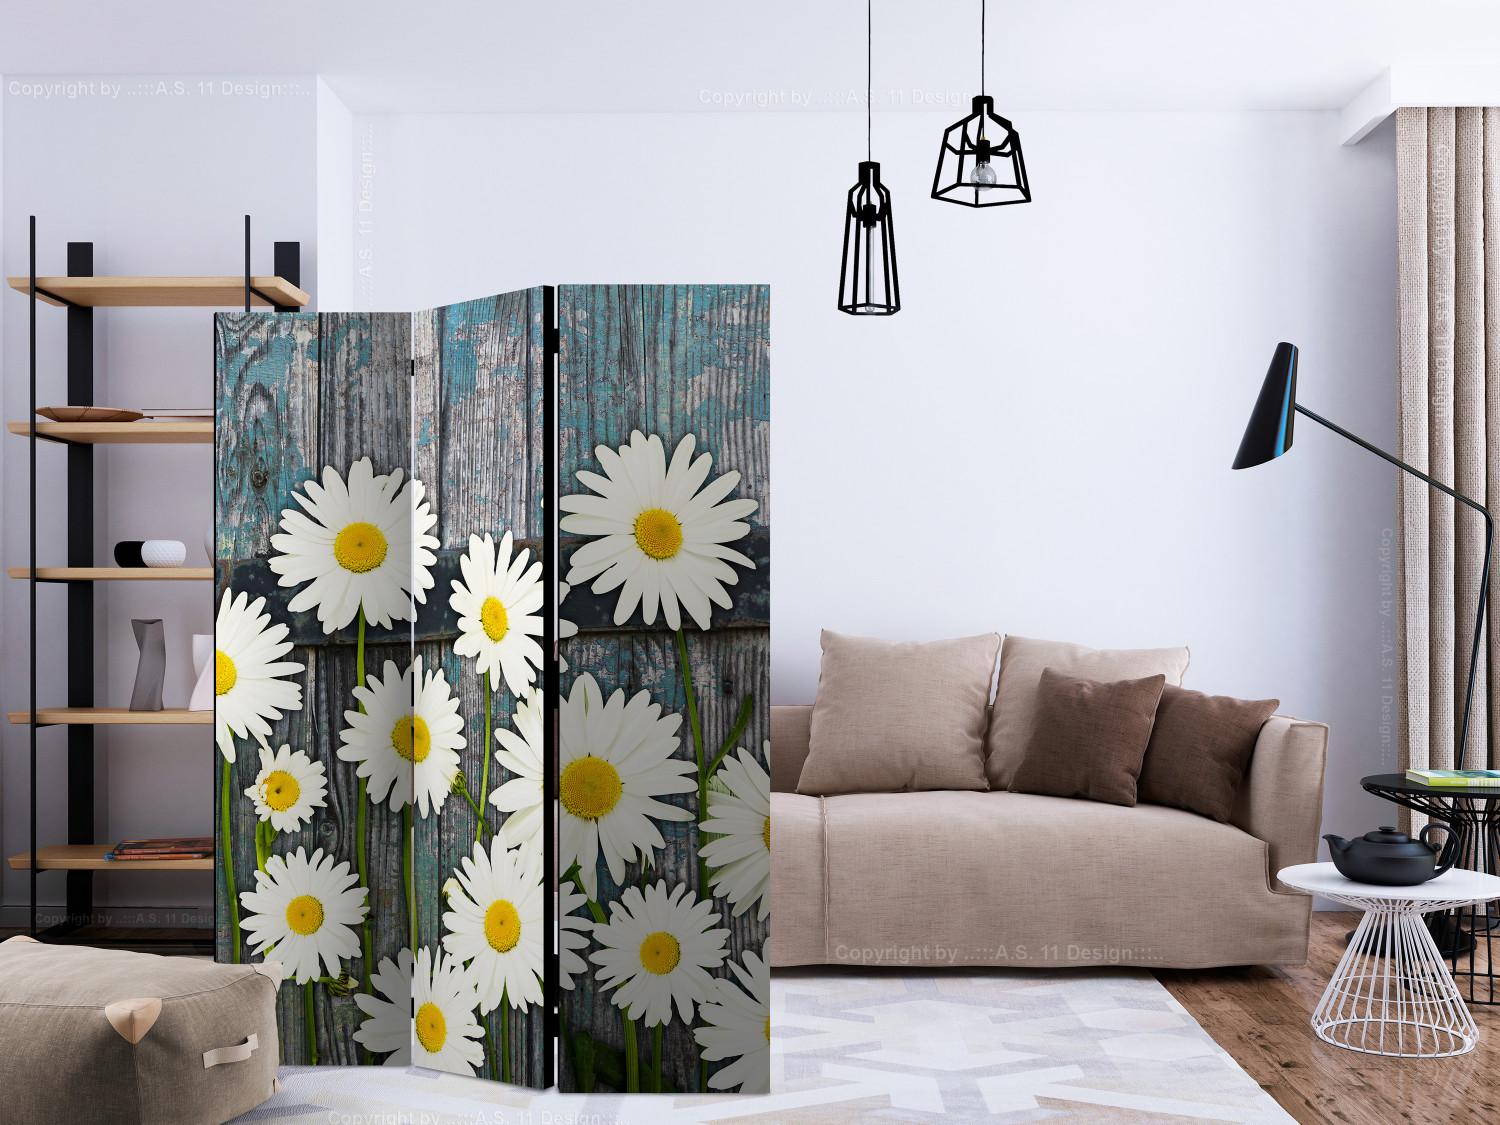 Room Divider Return to Innocence - composition of white daisies on a wooden plank background